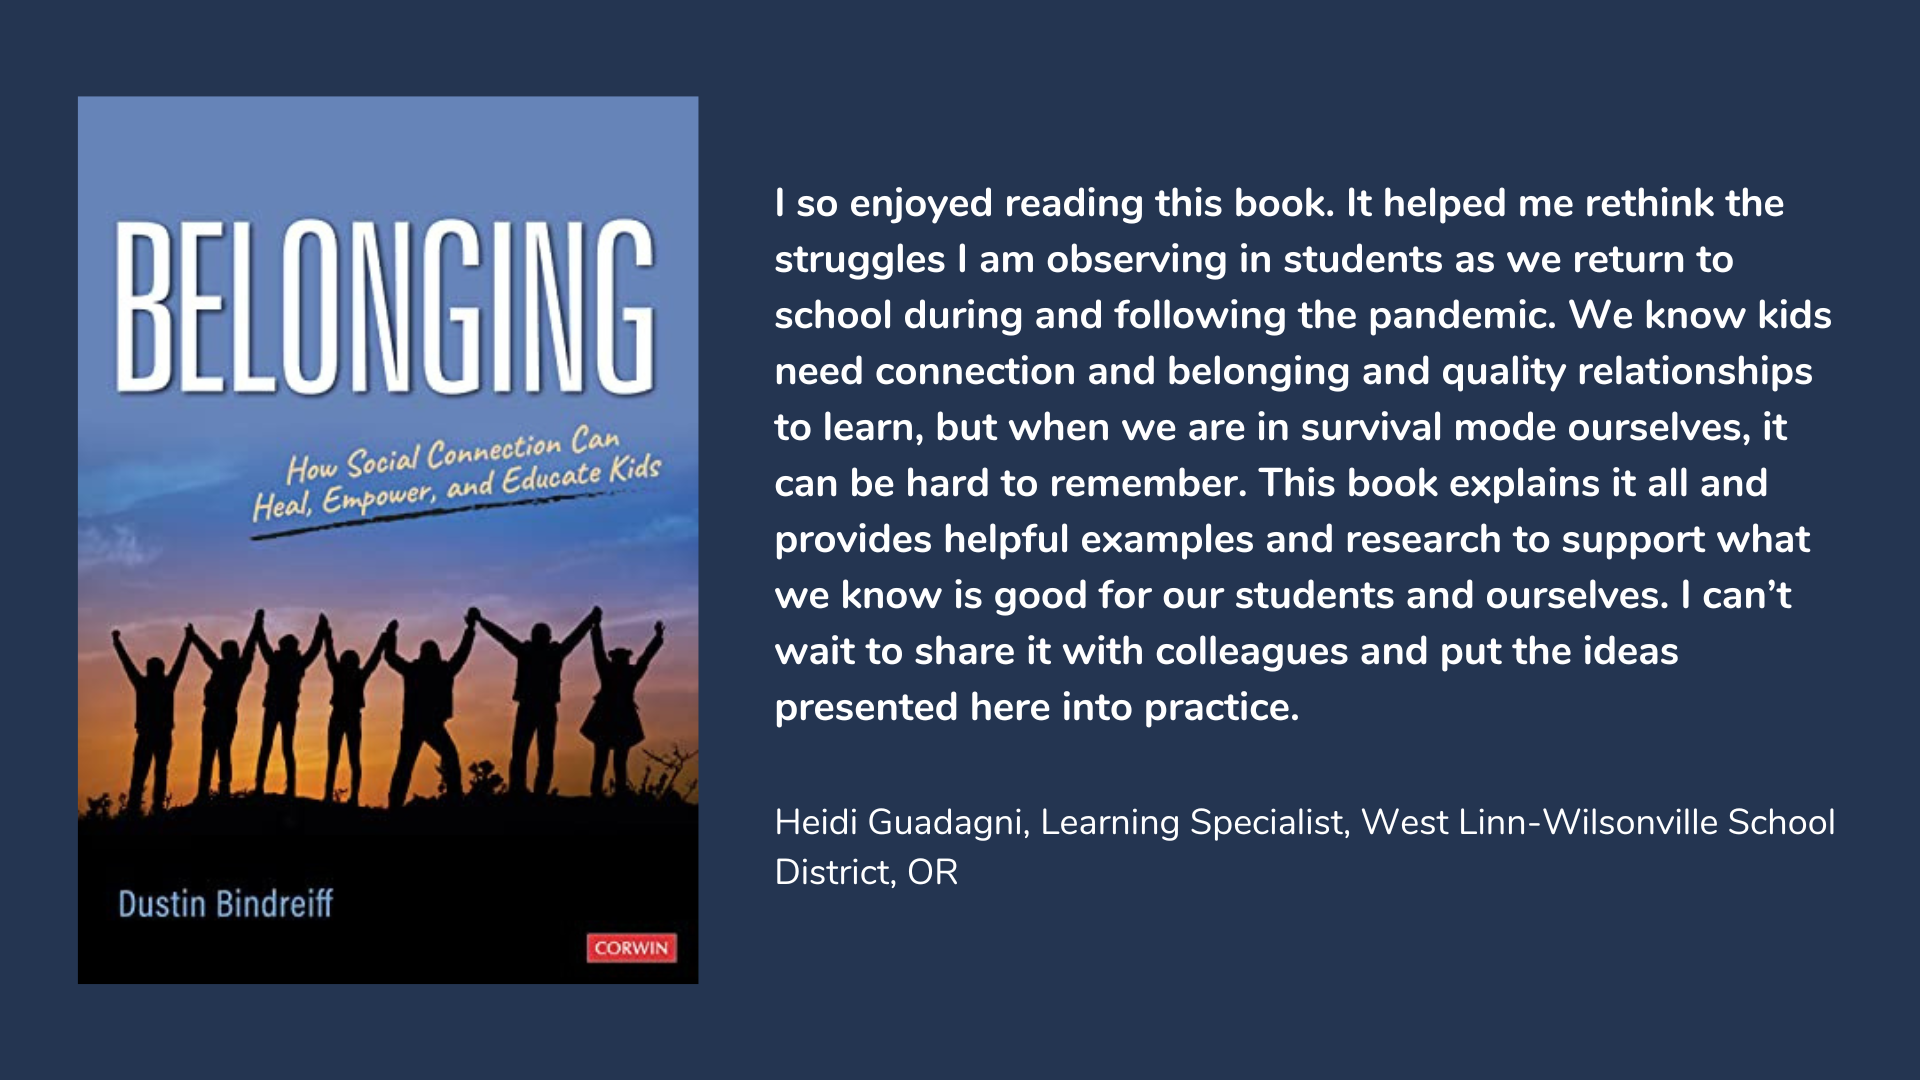 Belonging: How Social Connection Can Heal, Empower, and Educate Kids, book cover and review